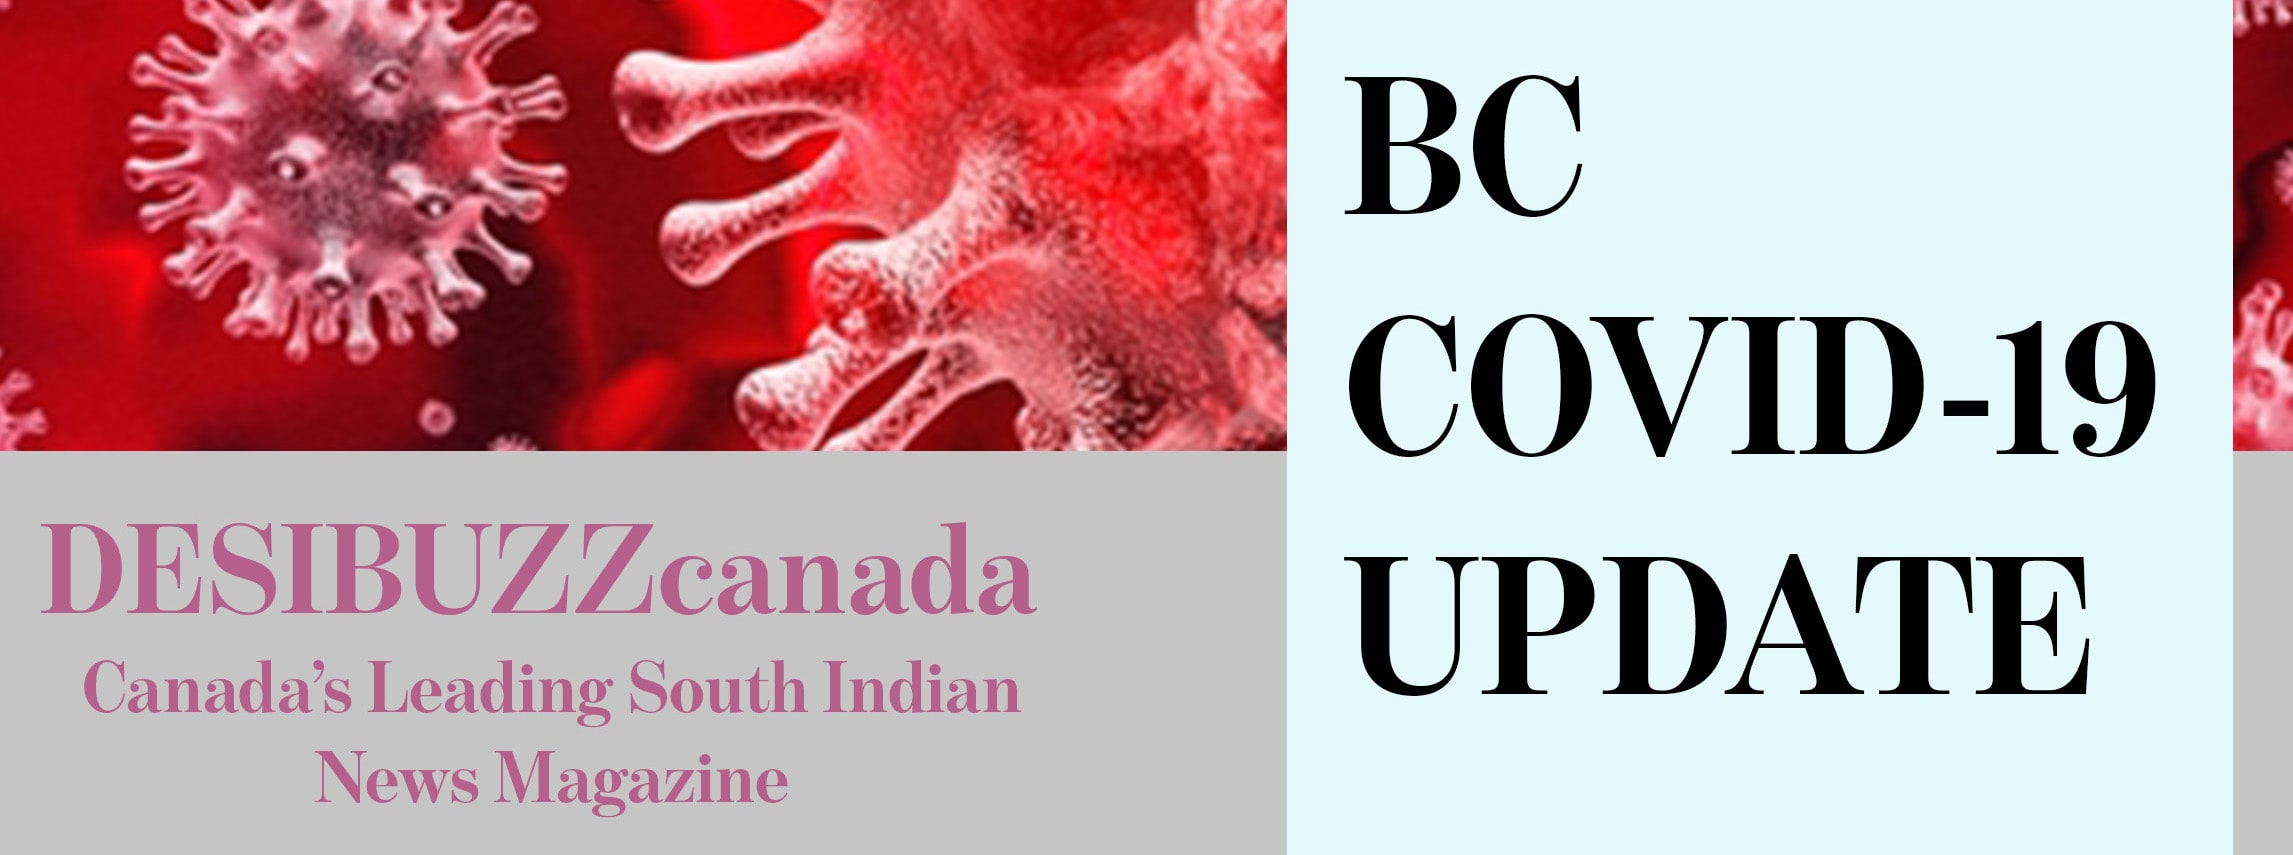 BC COVID-19 DAILY UPDATE: BC Hits Another Record With 1293 Cases On Thursday